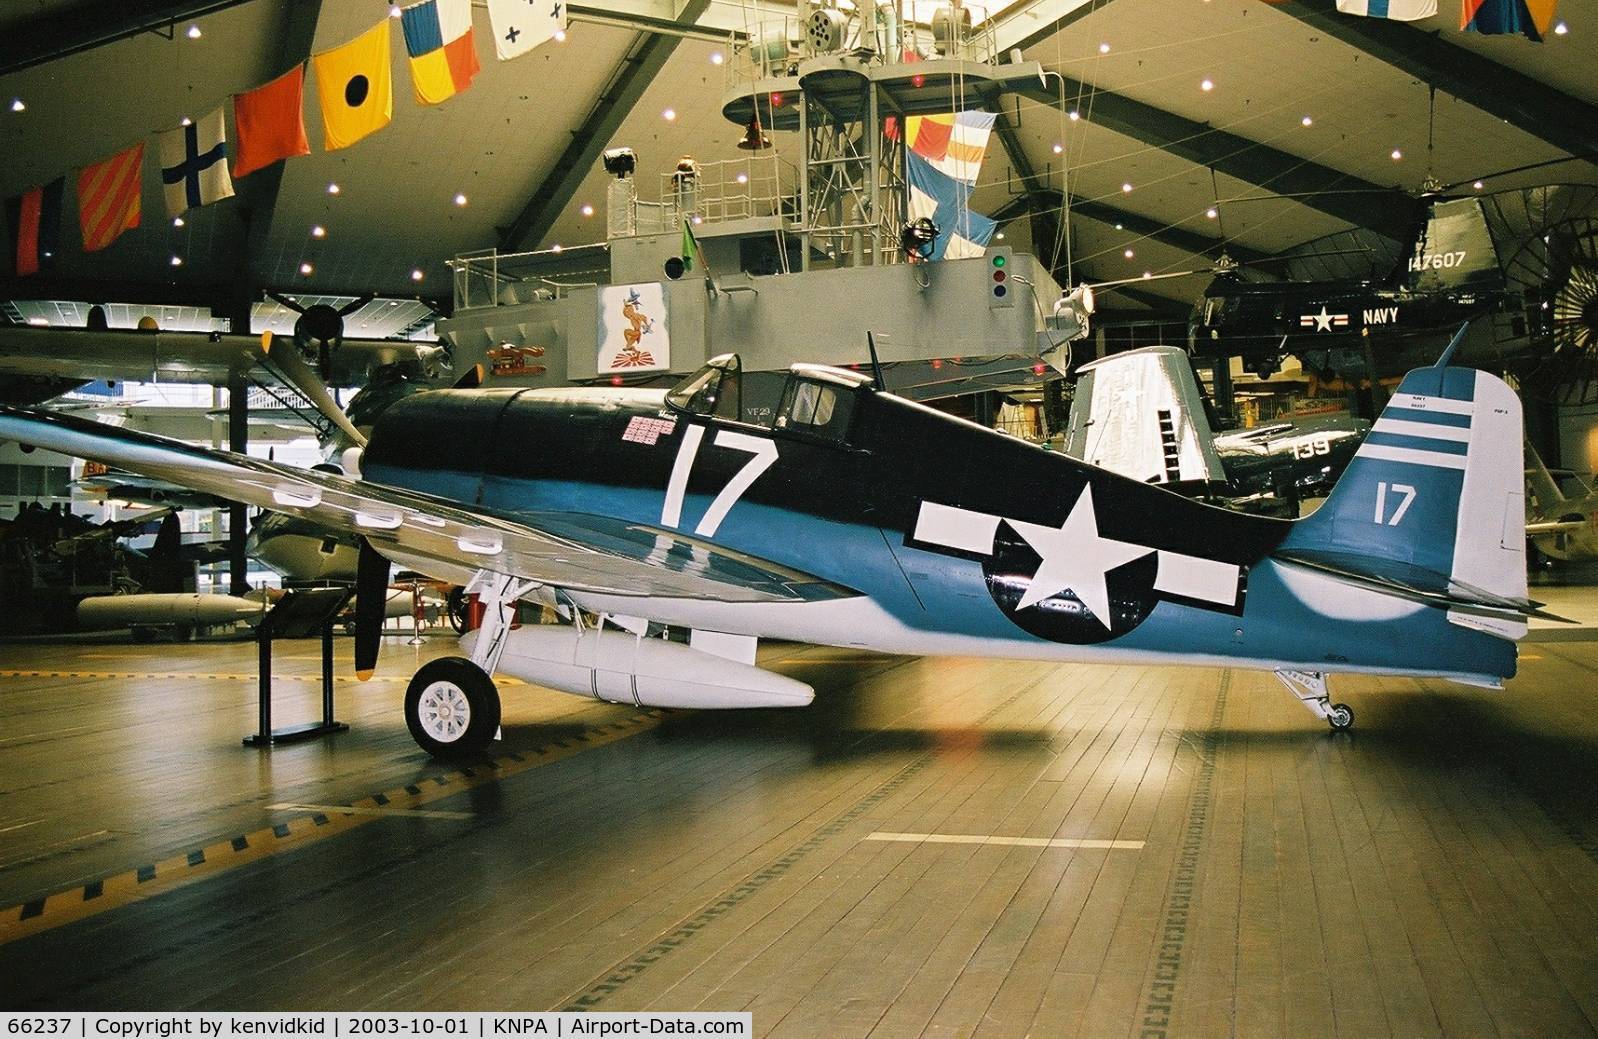 66237, Grumman F6F-3 Hellcat C/N A-1257, On display at the Museum of Naval Aviation, Pensacola.